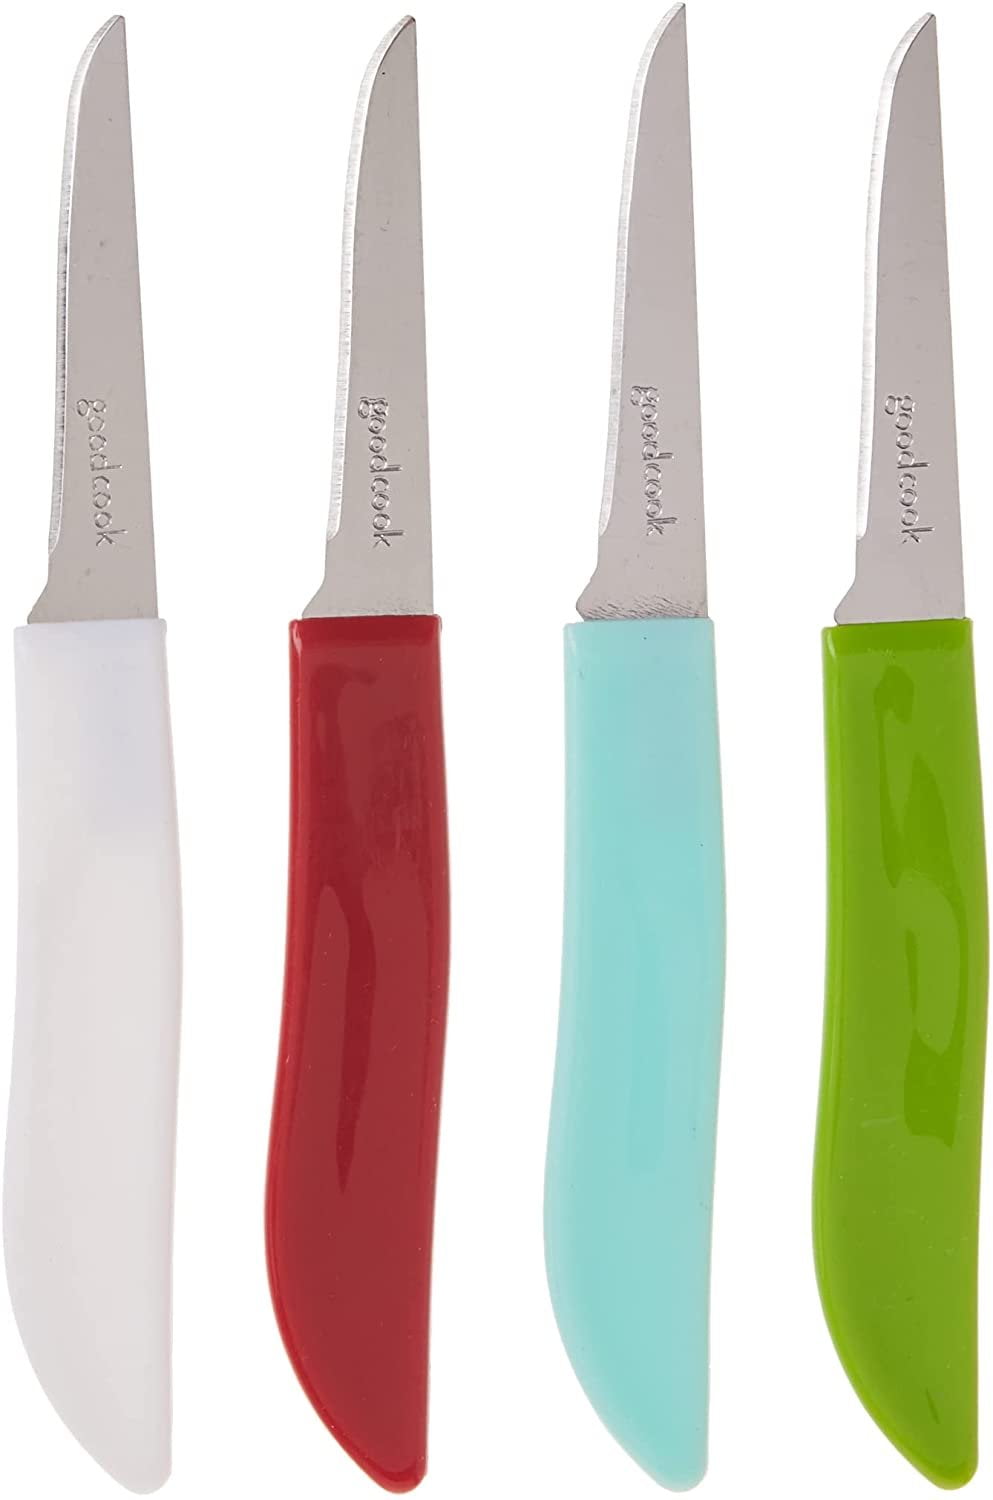 GoodCook Touch Ceramic Paring Knife, 3, Multicolored